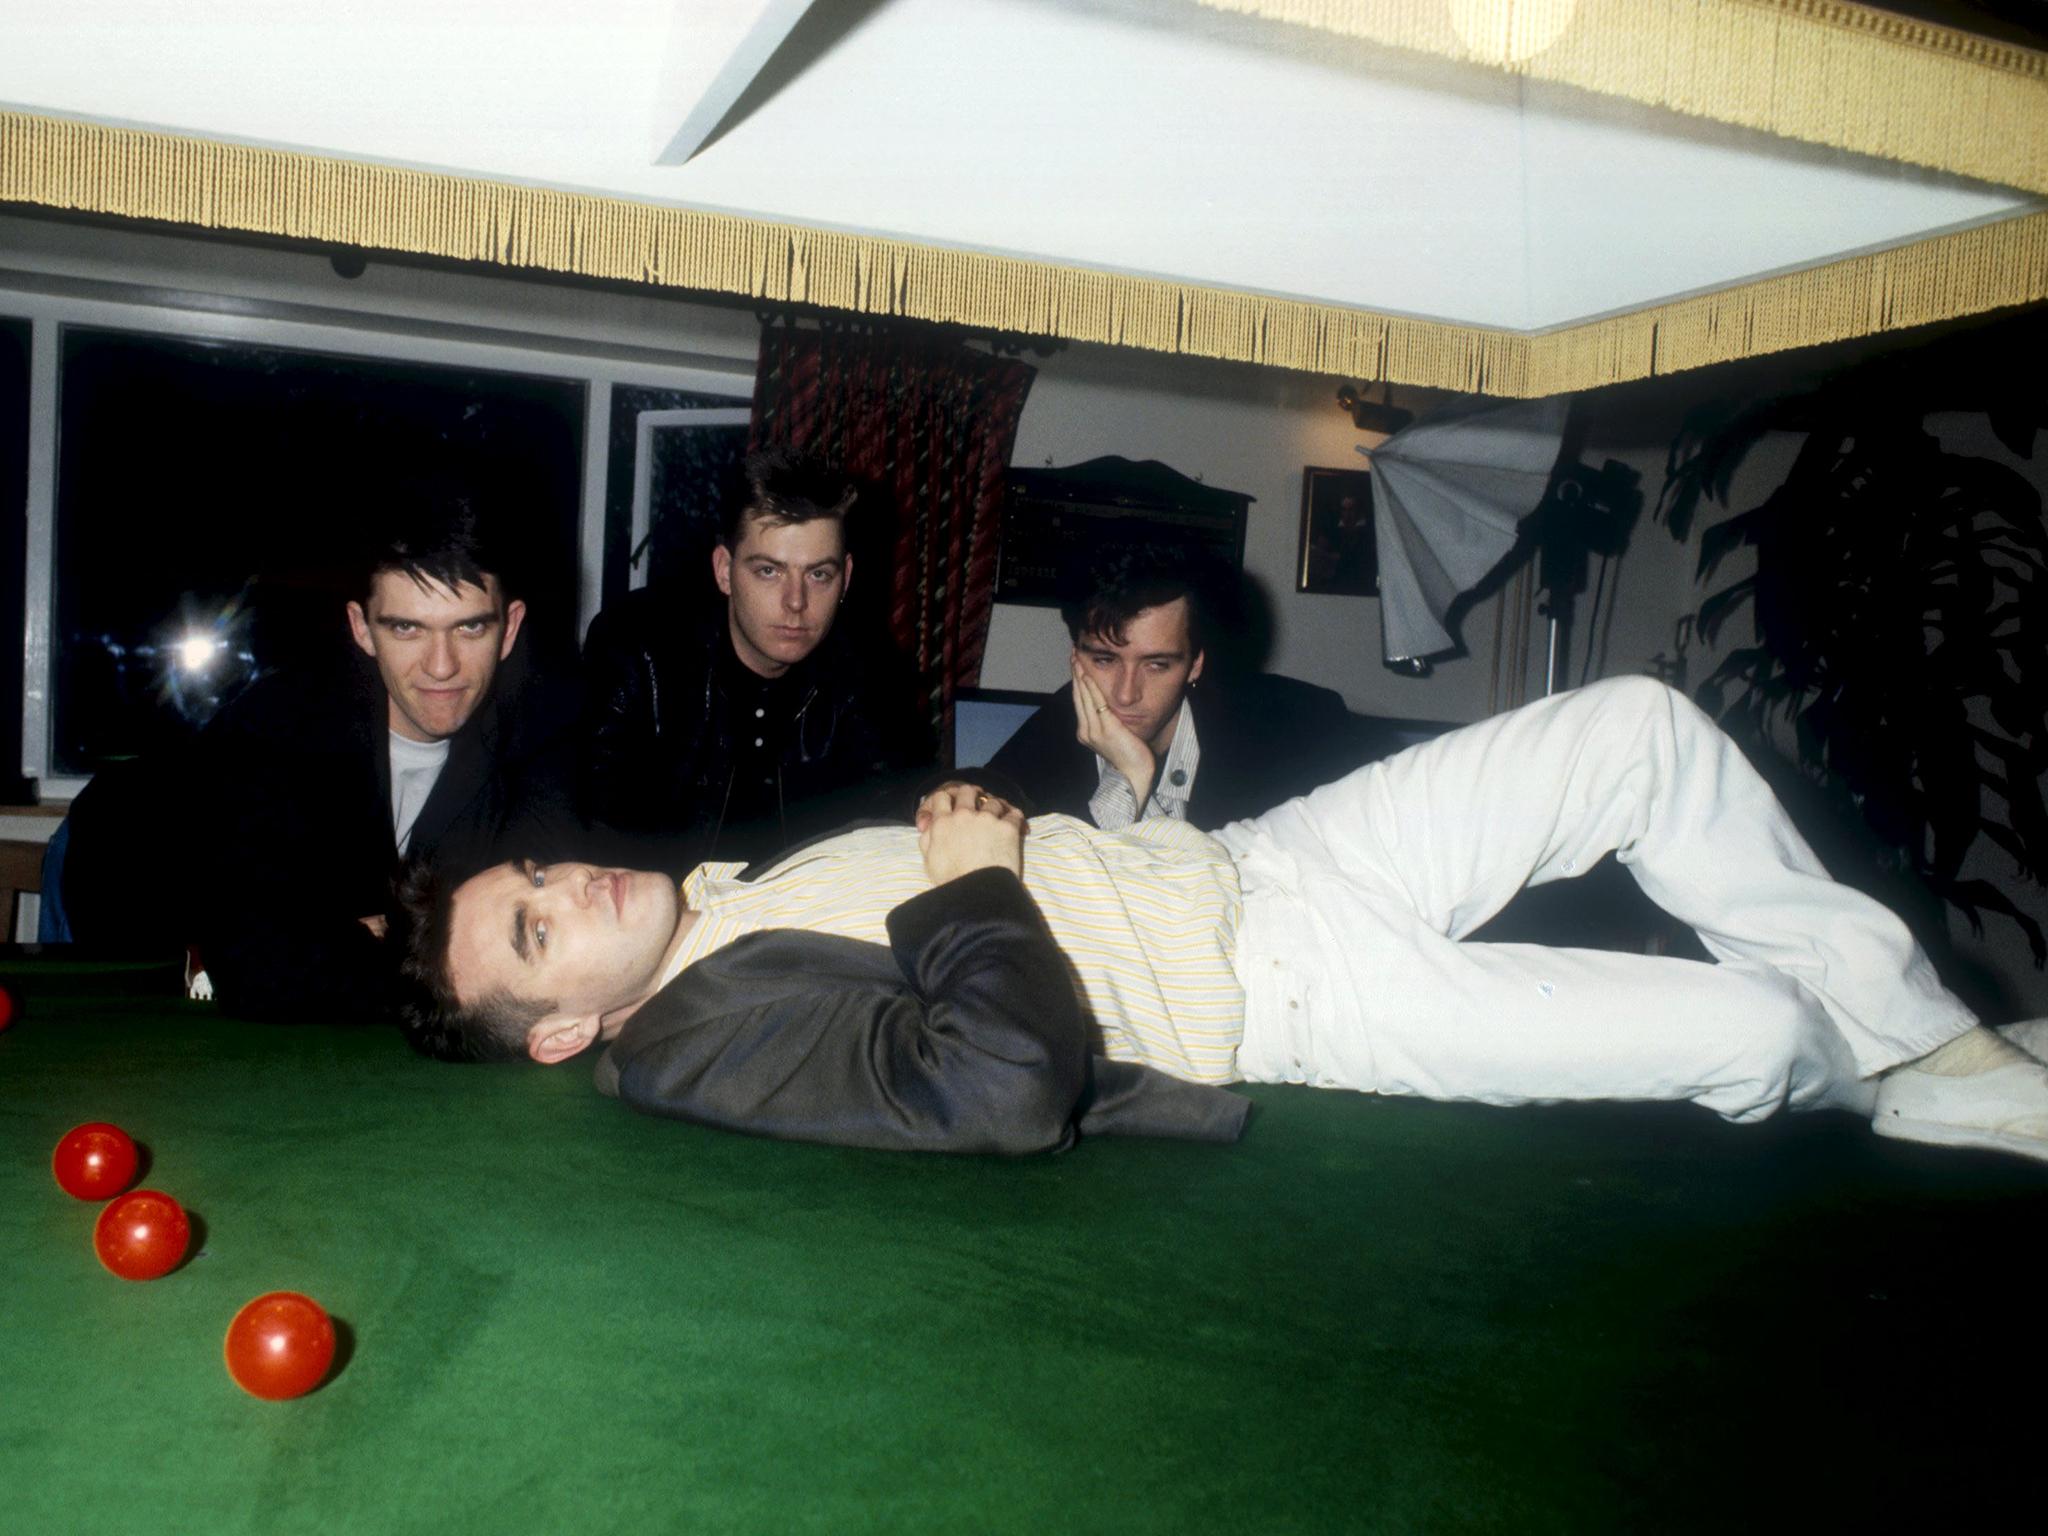 Heaven knows, The Smiths put Northern misery and humour at the heart of their songs